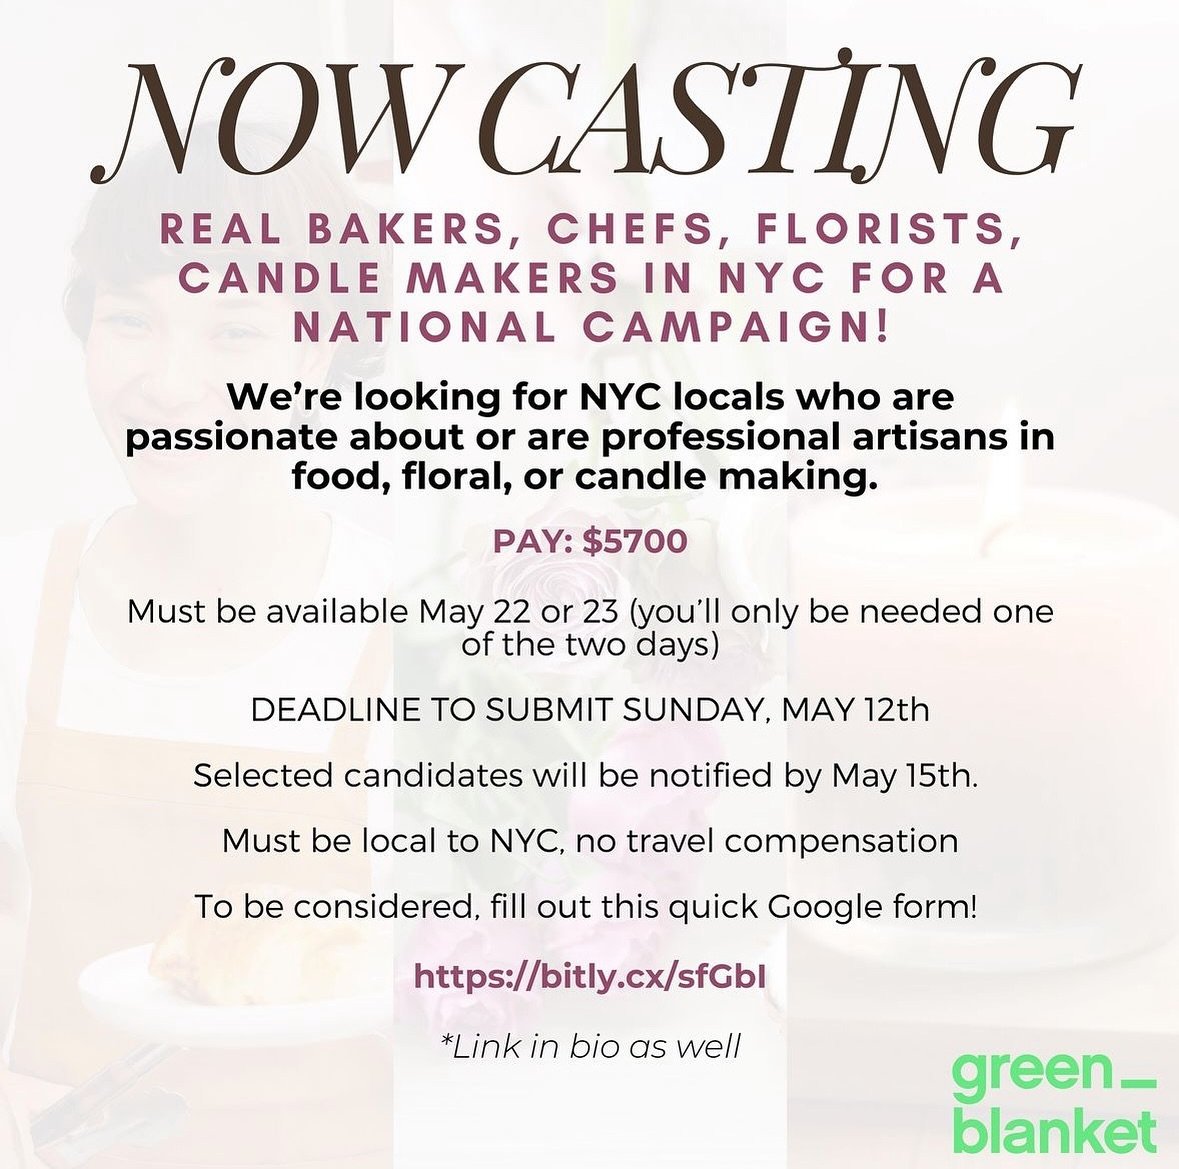 🚨 Excited to share this casting call for @beccacastsunscripted. Looking for bakers, chefs, florists and candle makers in NYC! Filming 5/22 or 5/23. Pay is $5700.

🕰️ Deadline is Sunday 5/12! So get your application in ASAP. Tell &lsquo;em Jax sent 